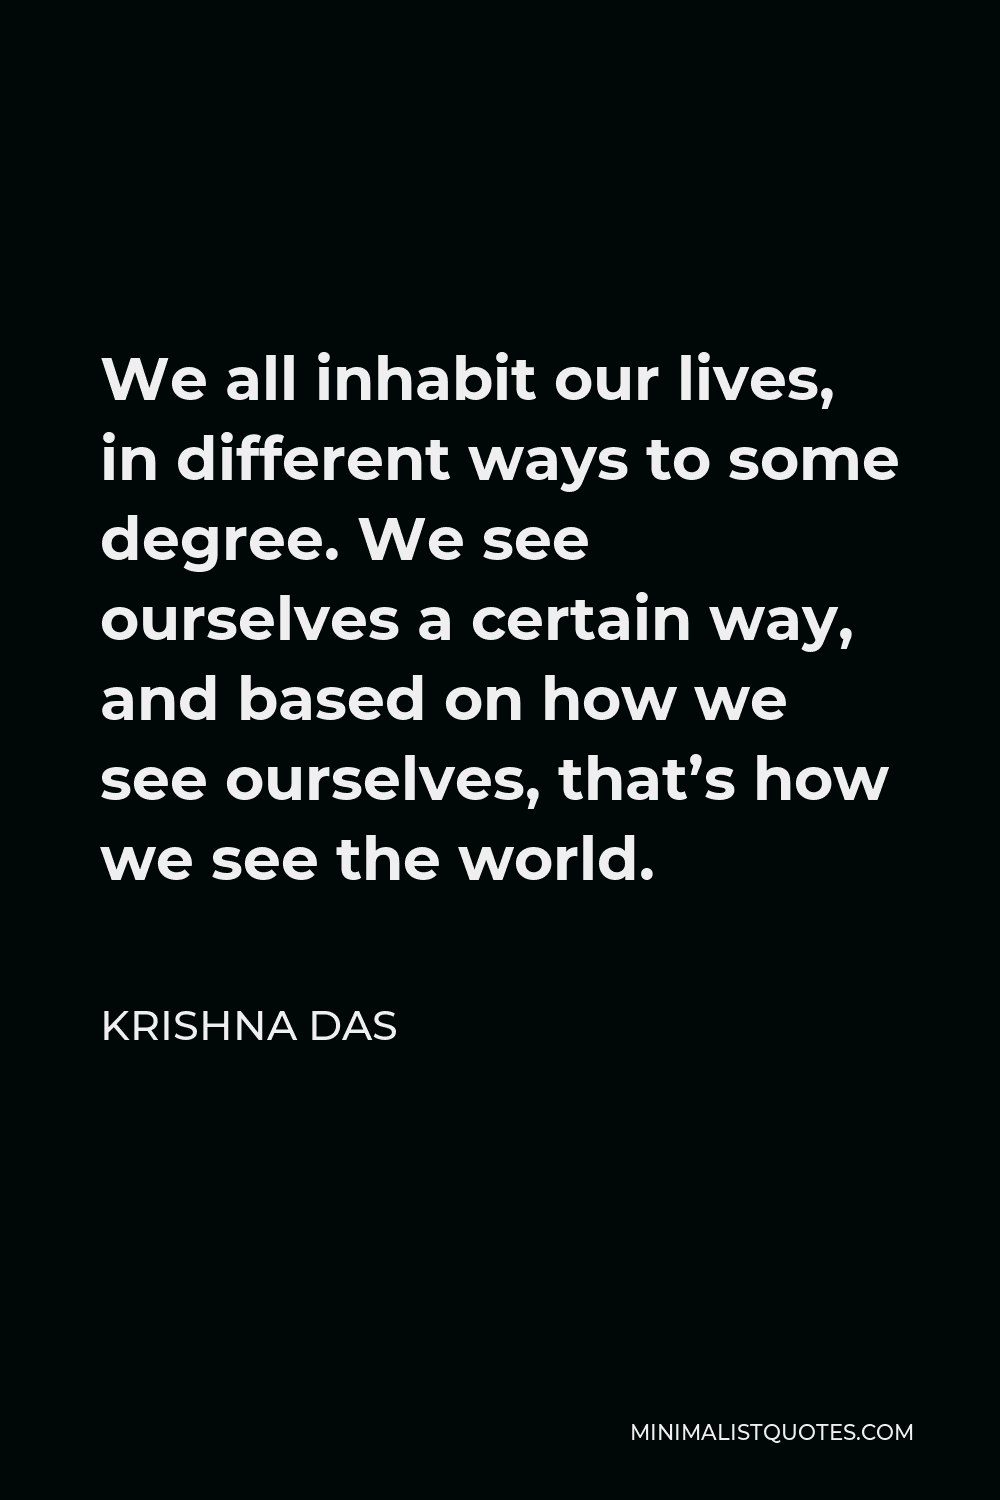 Krishna Das Quote - We all inhabit our lives, in different ways to some degree. We see ourselves a certain way, and based on how we see ourselves, that’s how we see the world.